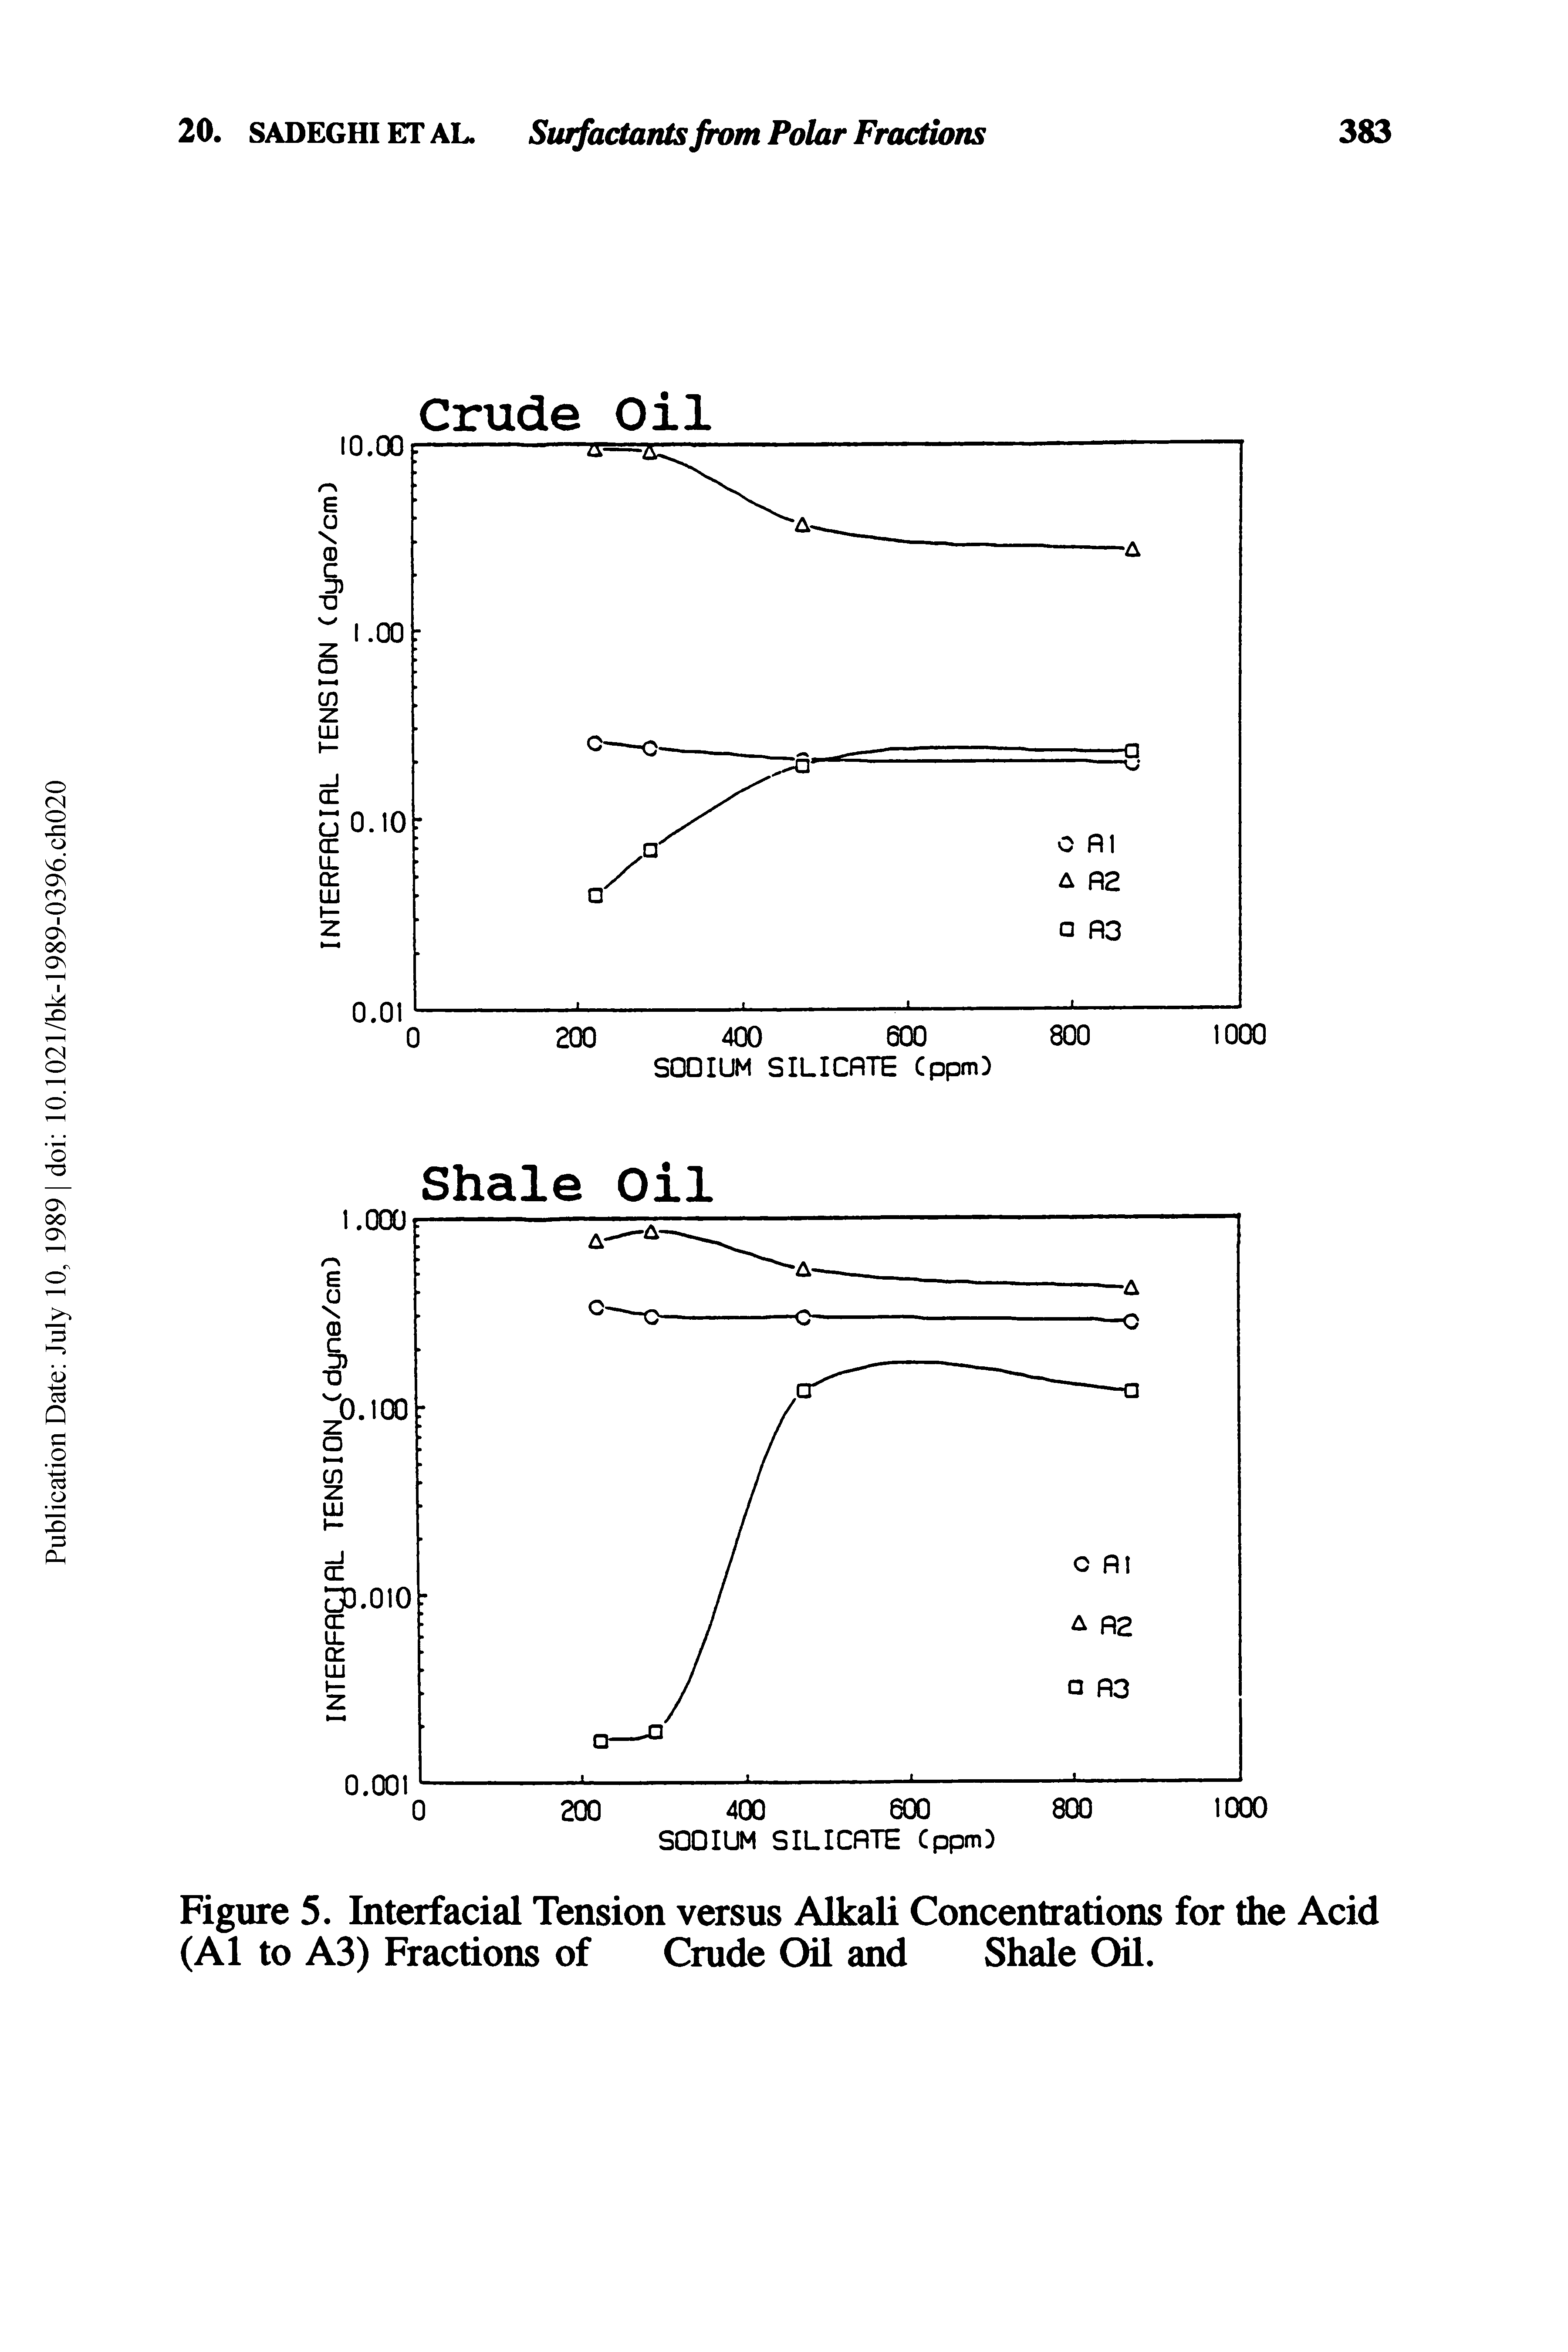 Figure 5. Interfacial Tension versus Alkali Concentrations for the Acid (A1 to A3) Fractions of Crude Oil and Shale Oil.